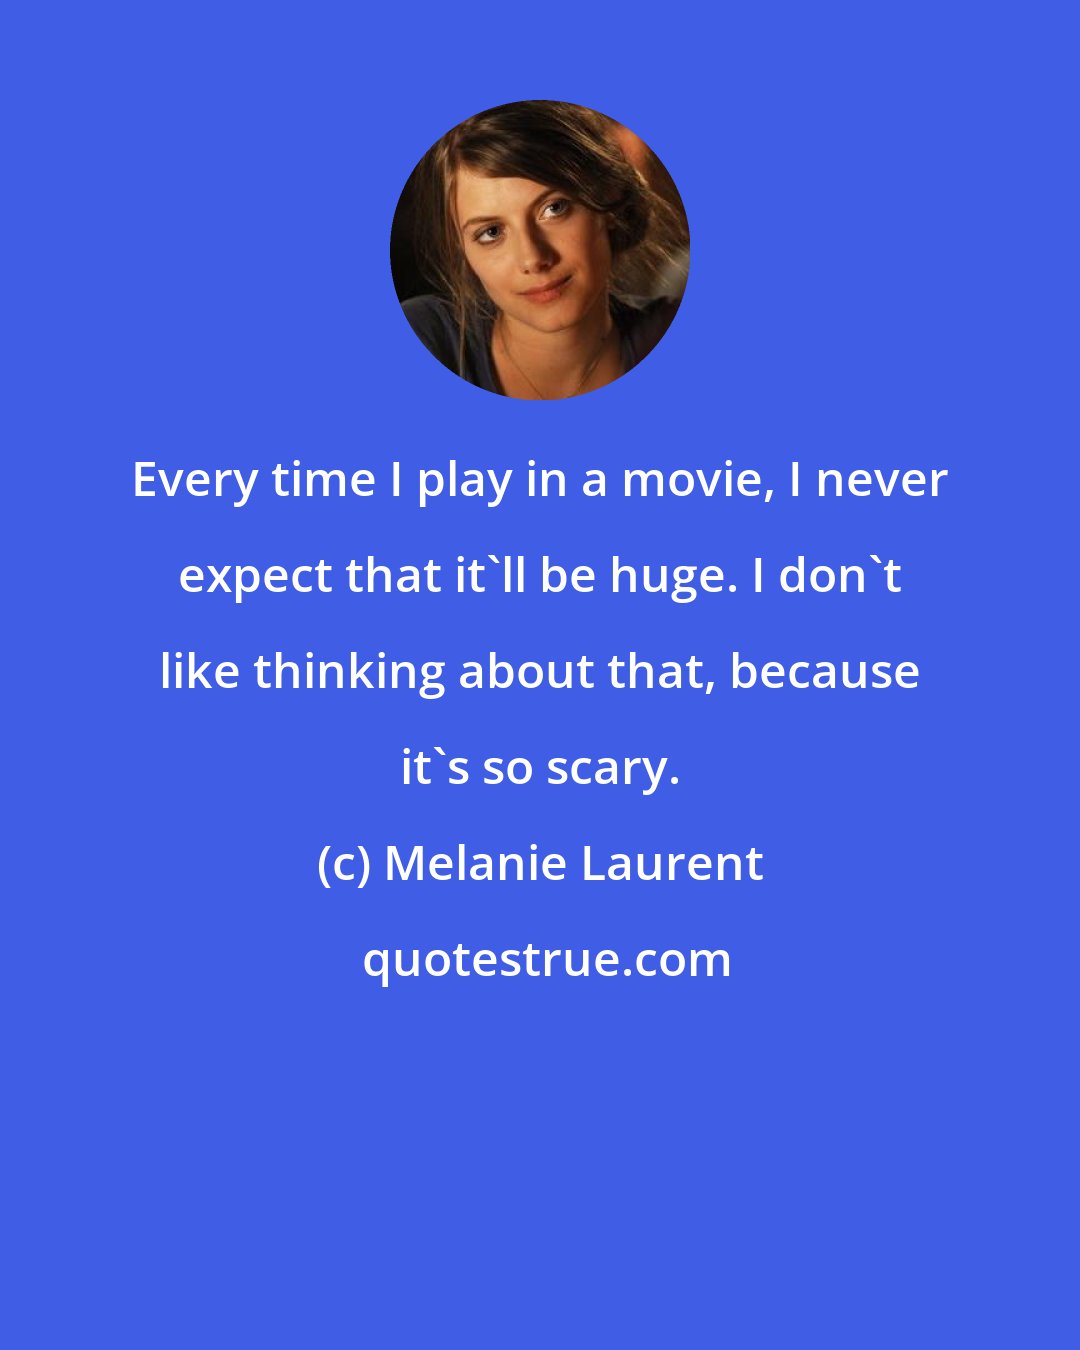 Melanie Laurent: Every time I play in a movie, I never expect that it'll be huge. I don't like thinking about that, because it's so scary.